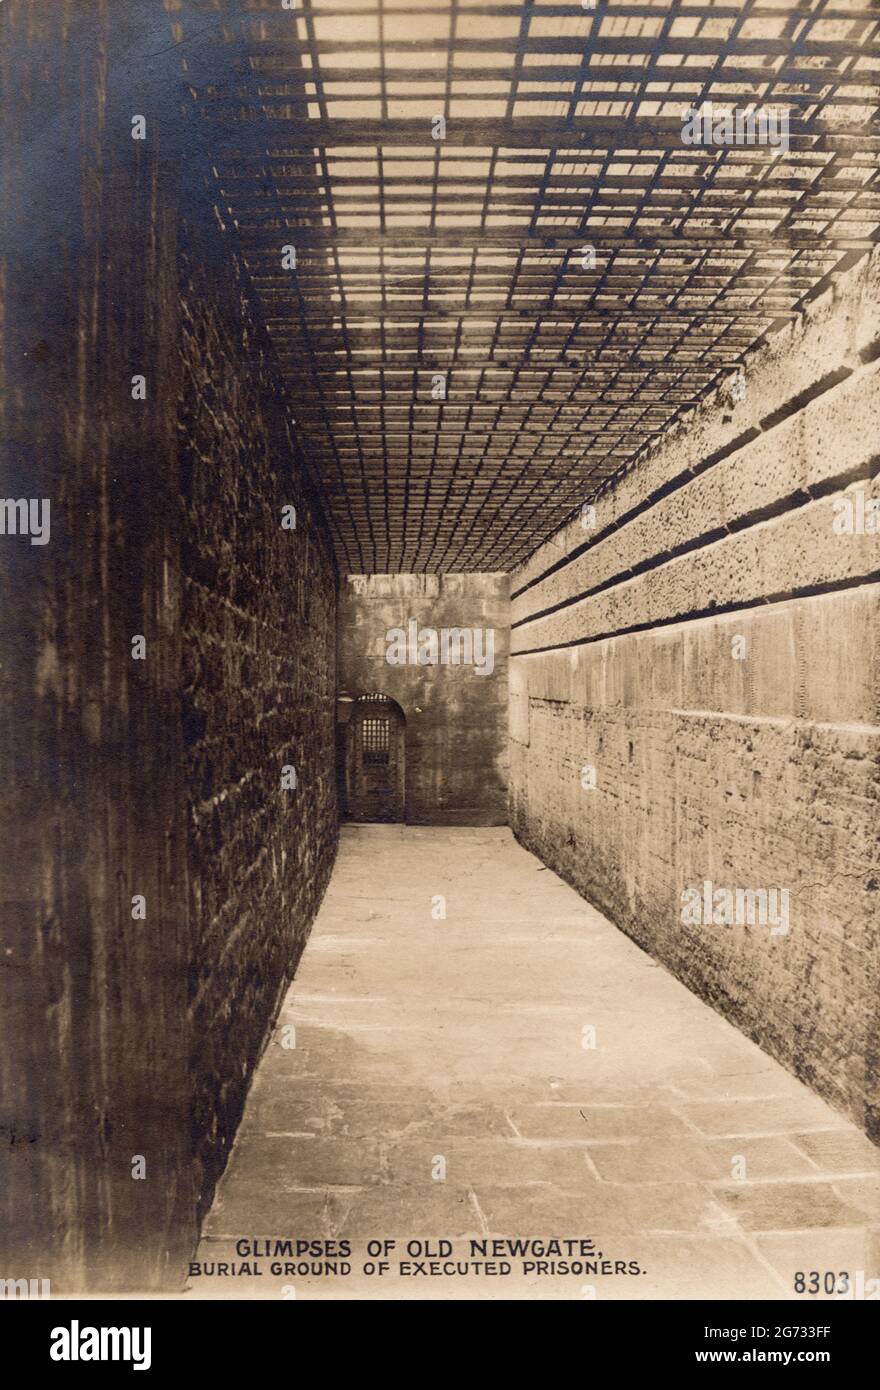 Glimpses of Old Newgate - Burial Ground of Executed Prisoners, c1900. Newgate Prison, dating back to the 12th century, was originally located at the site of Newgate, a gate in the Roman wall around the city of London. Public hangings, of both men and women, took place outside the prison from 1783 and continued until 1868, when executions were carried out on gallows inside Newgate. In total, 1,169 people were executed - publicly or otherwise - at the prison. Many types of criminals were imprisoned at Newgate, and their offences varied from petty crime and theft, breaking and entering, highway r Stock Photo